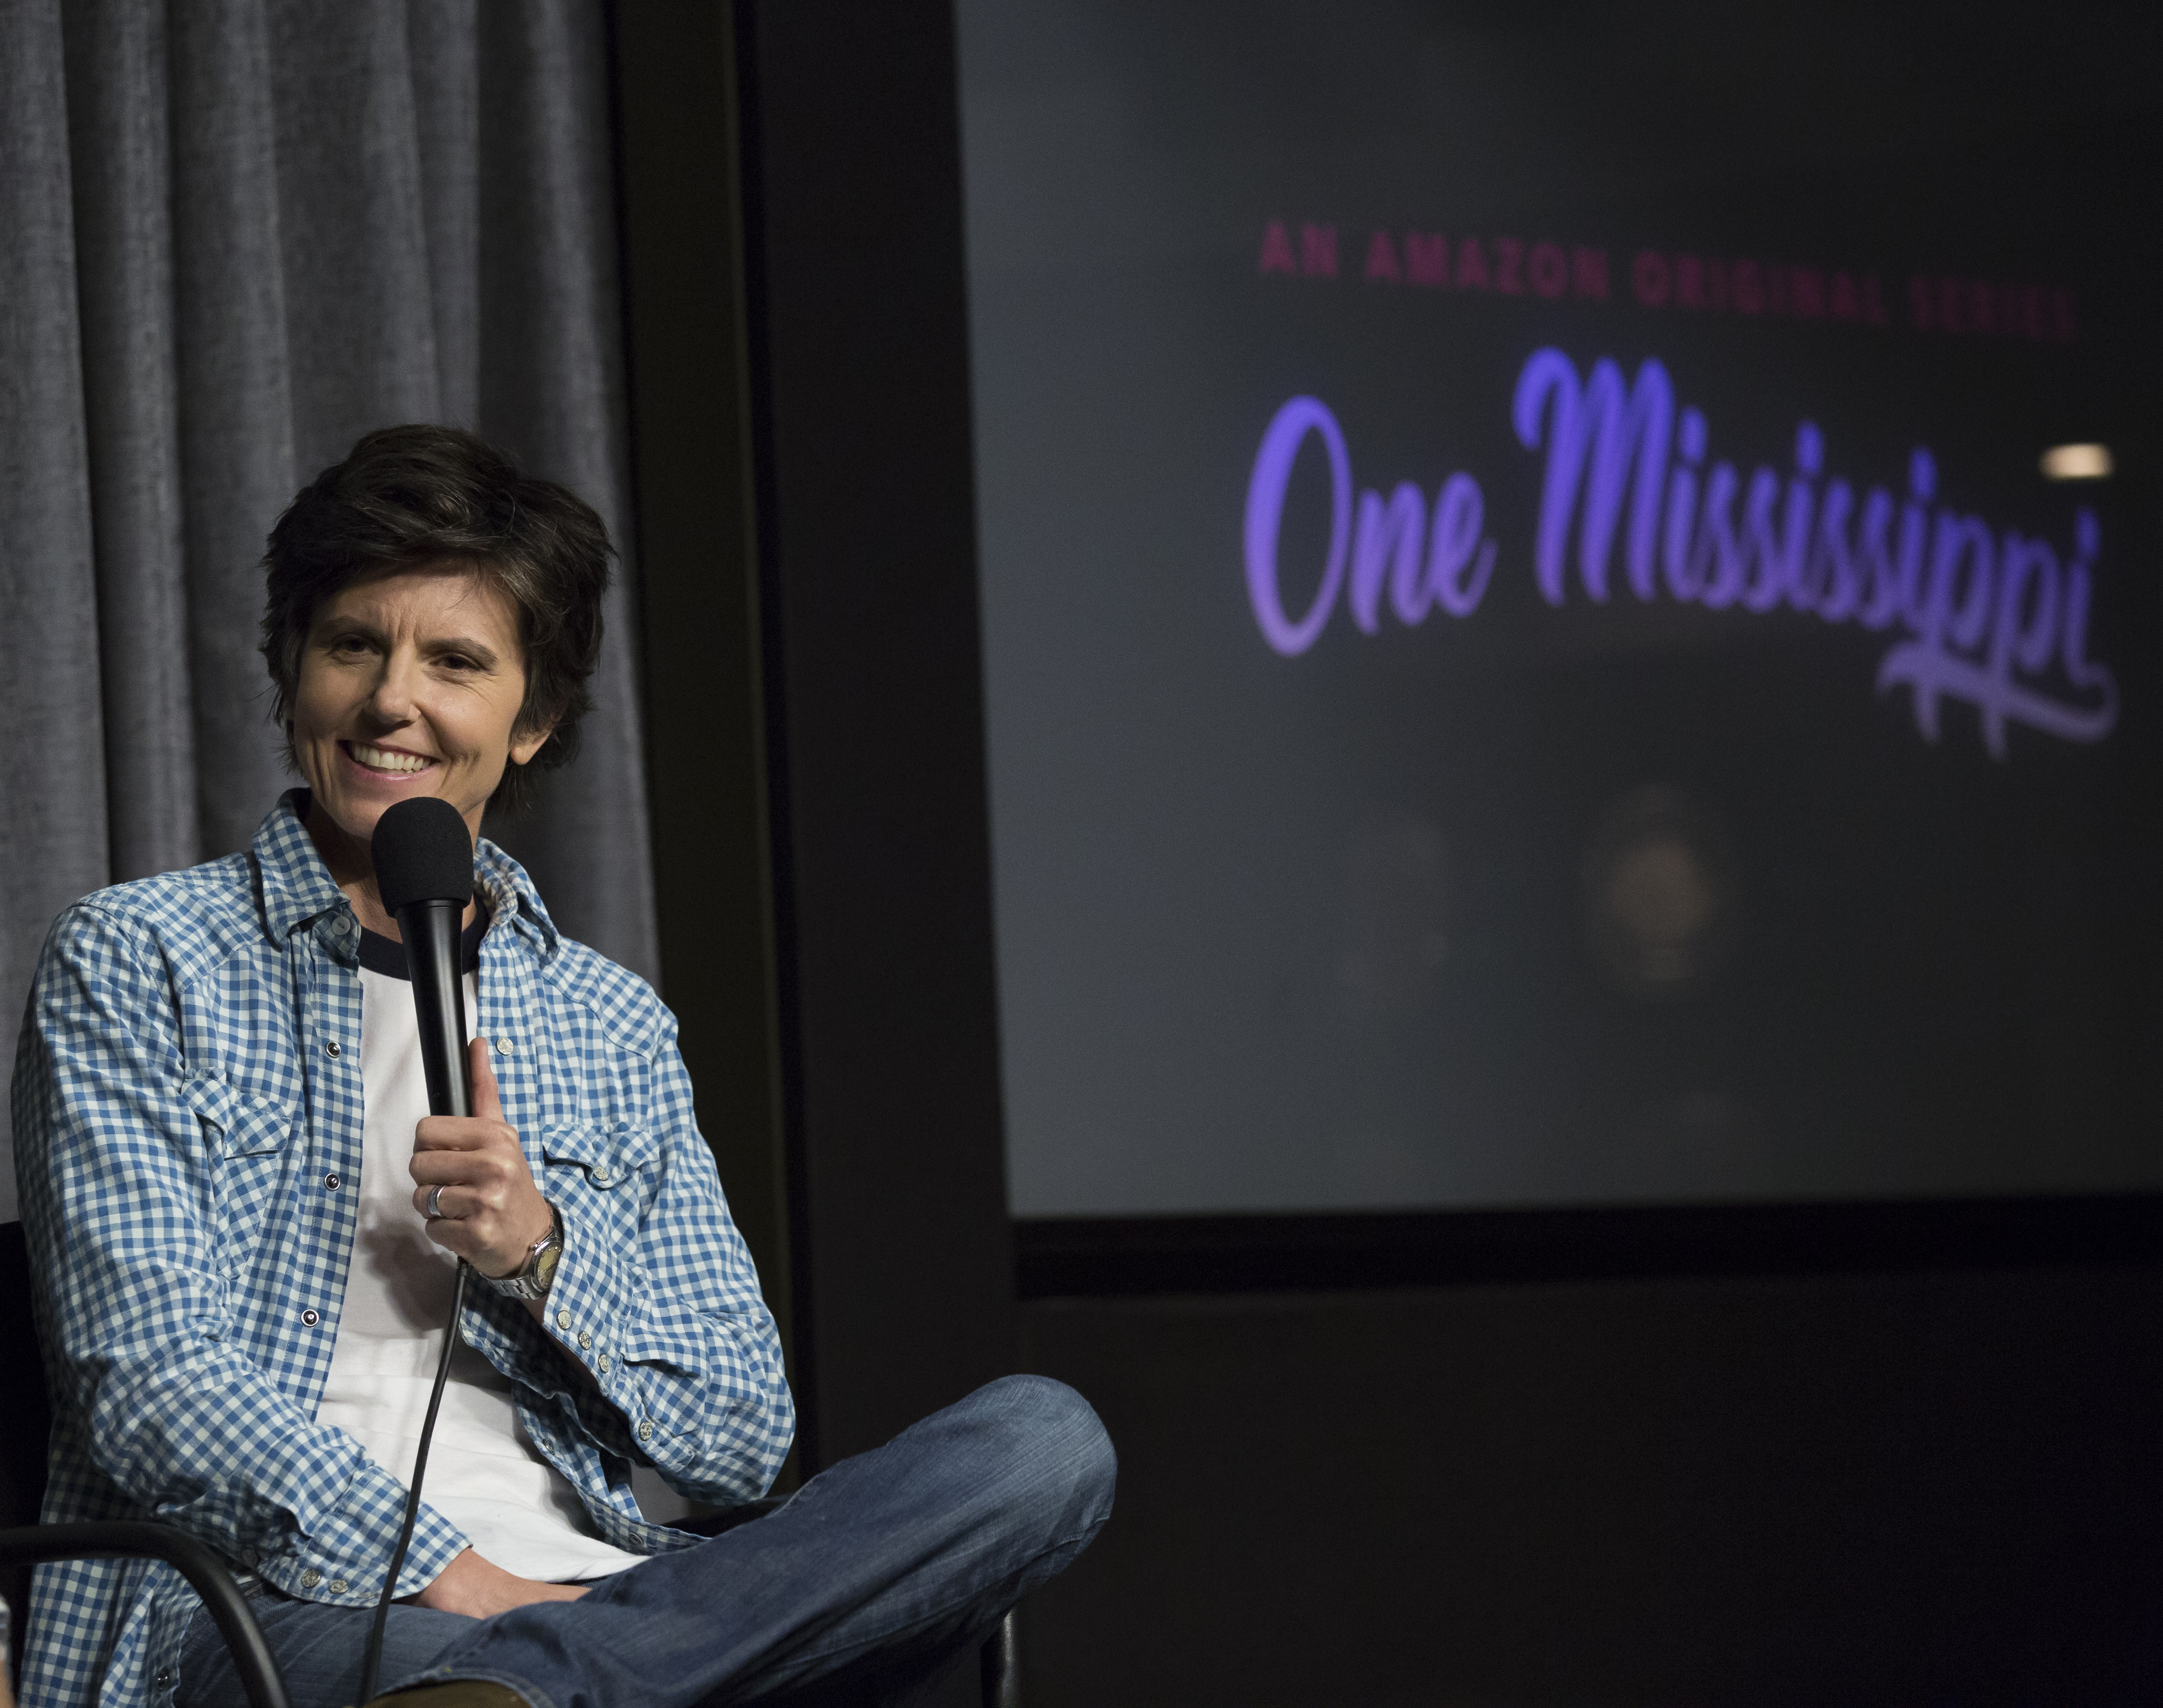 LOS ANGELES, CA - SEPTEMBER 07:  Comedian Tig Notaro attends SAG-AFTRA Foundation Conversations for "One Mississippi" at SAG-AFTRA Foundation on September 7, 2016 in Los Angeles, California.  (Photo by Vincent Sandoval/Getty Images) (Vincent Sandoval&mdash;Getty Images)